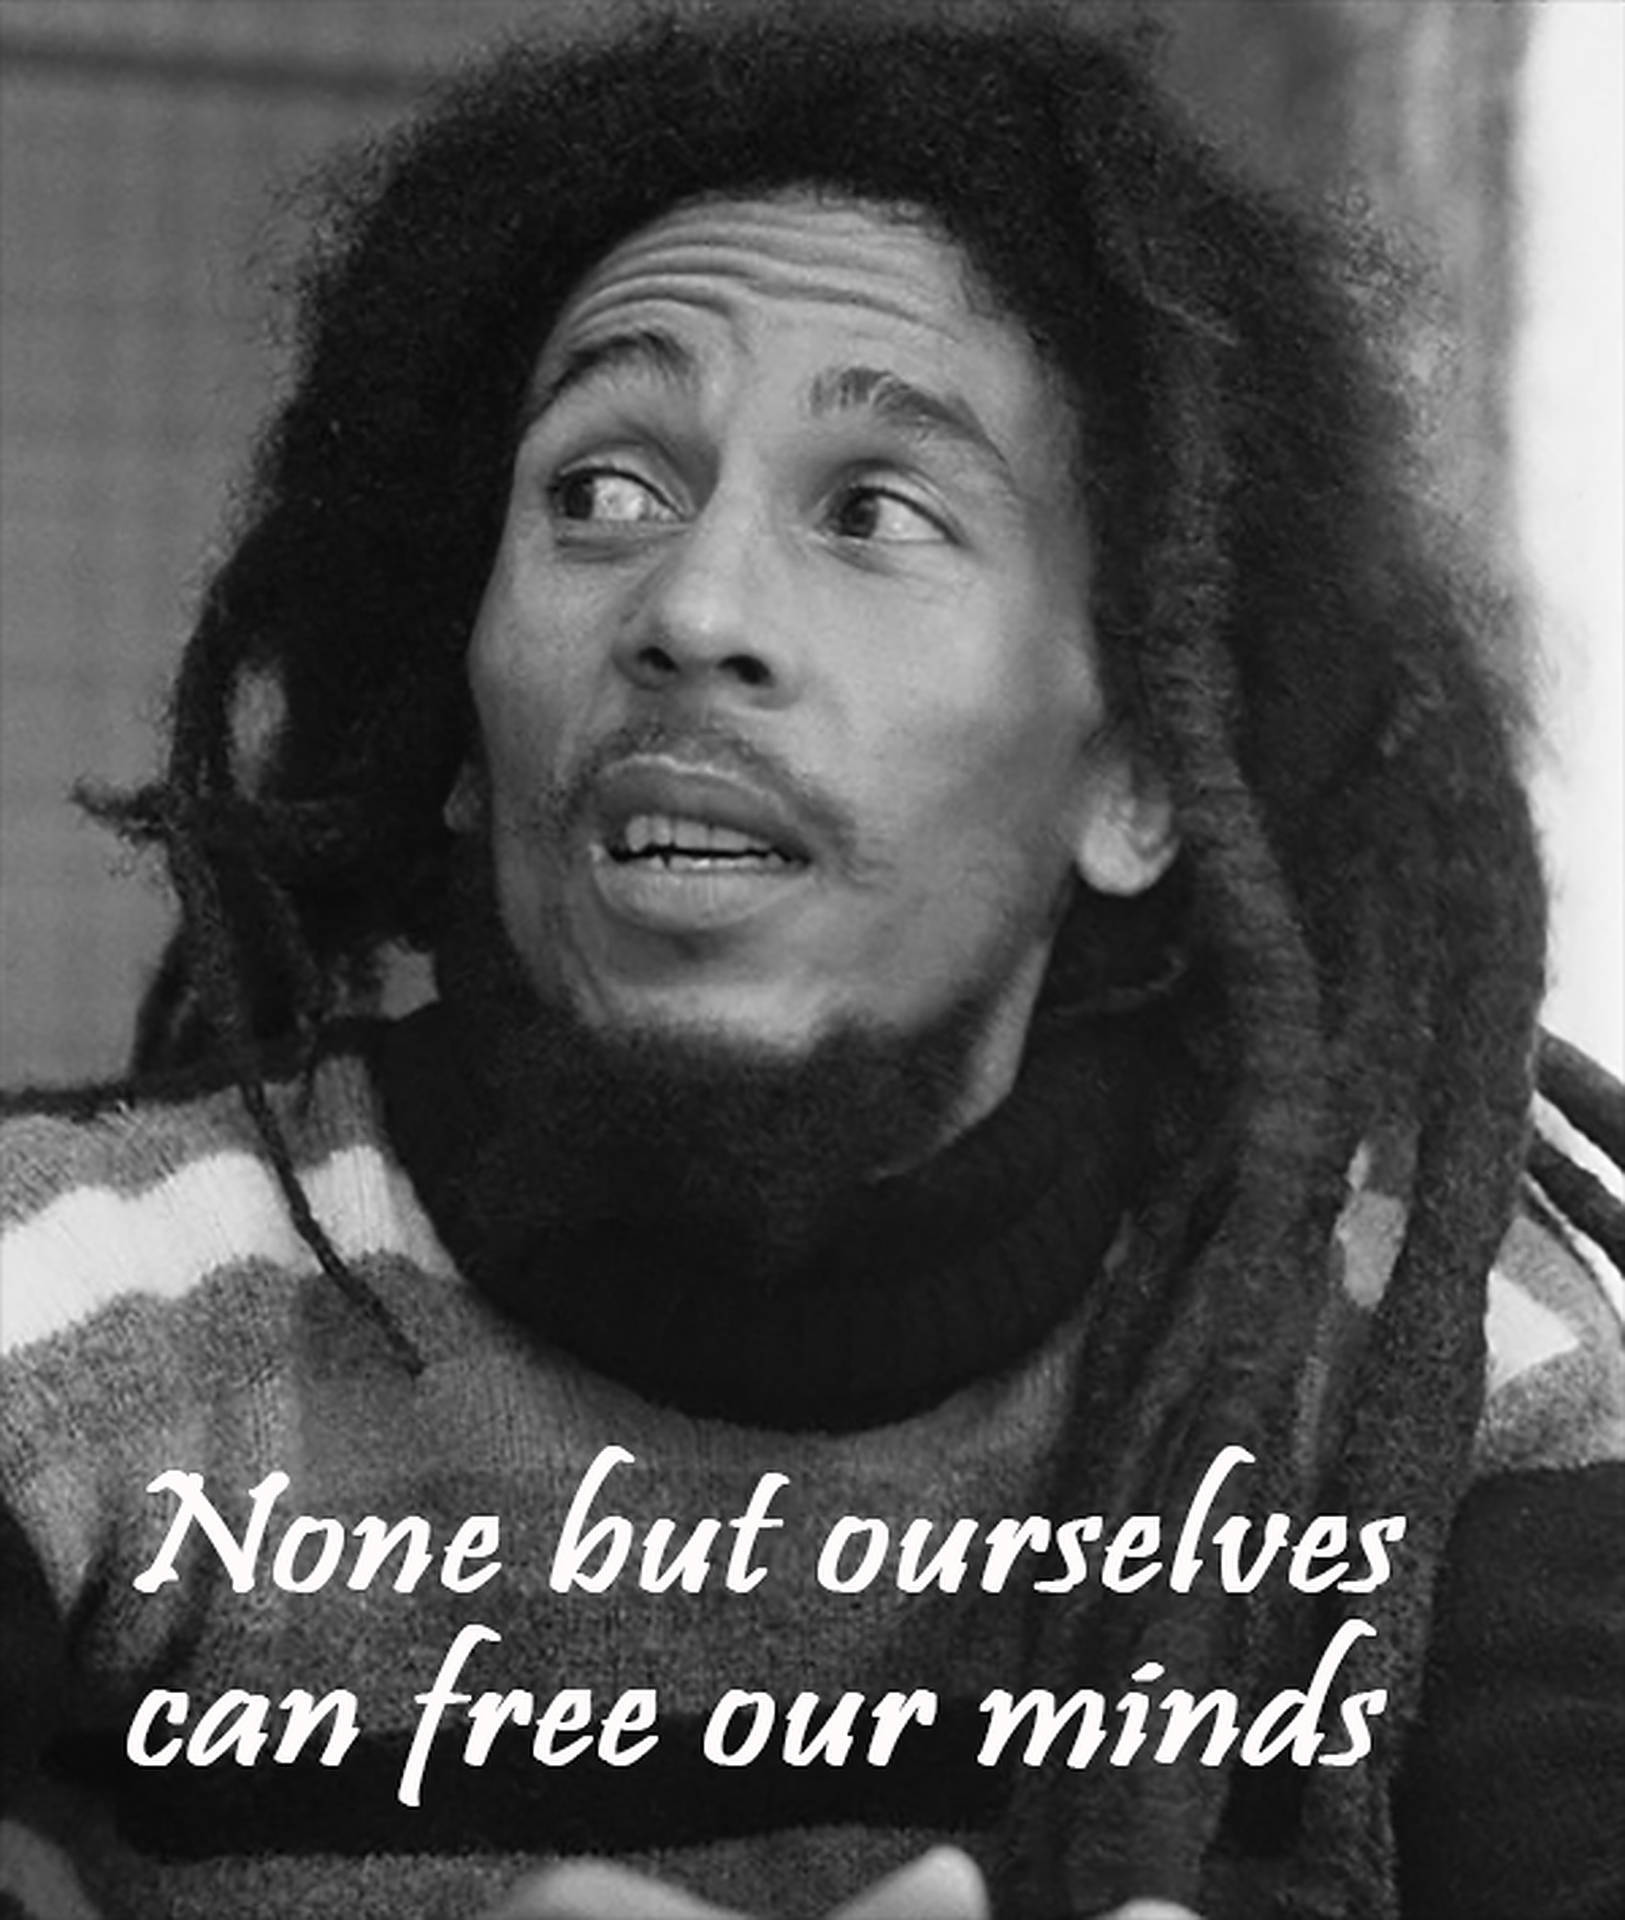 Bob Marley Free Our Minds Quotes Wallpaper